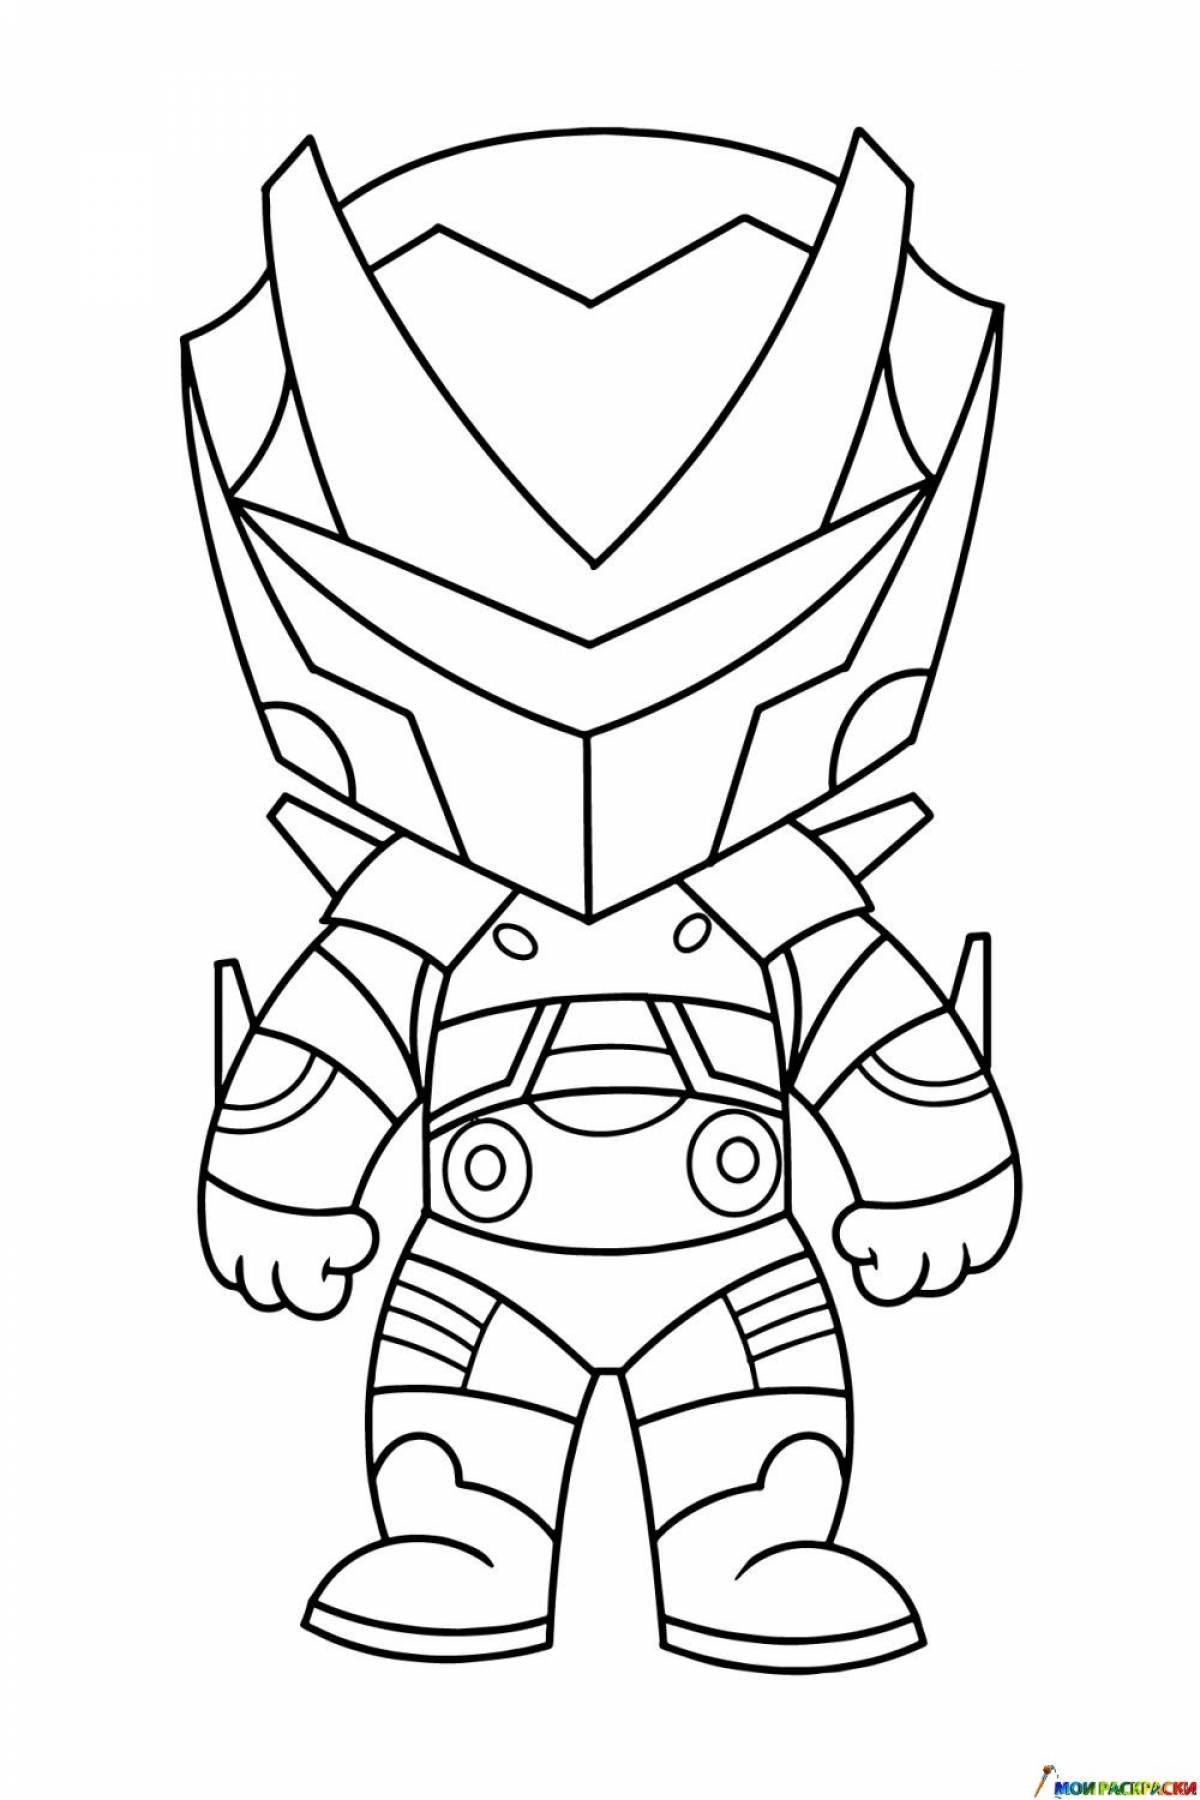 Brightly colored Ford Knight coloring book